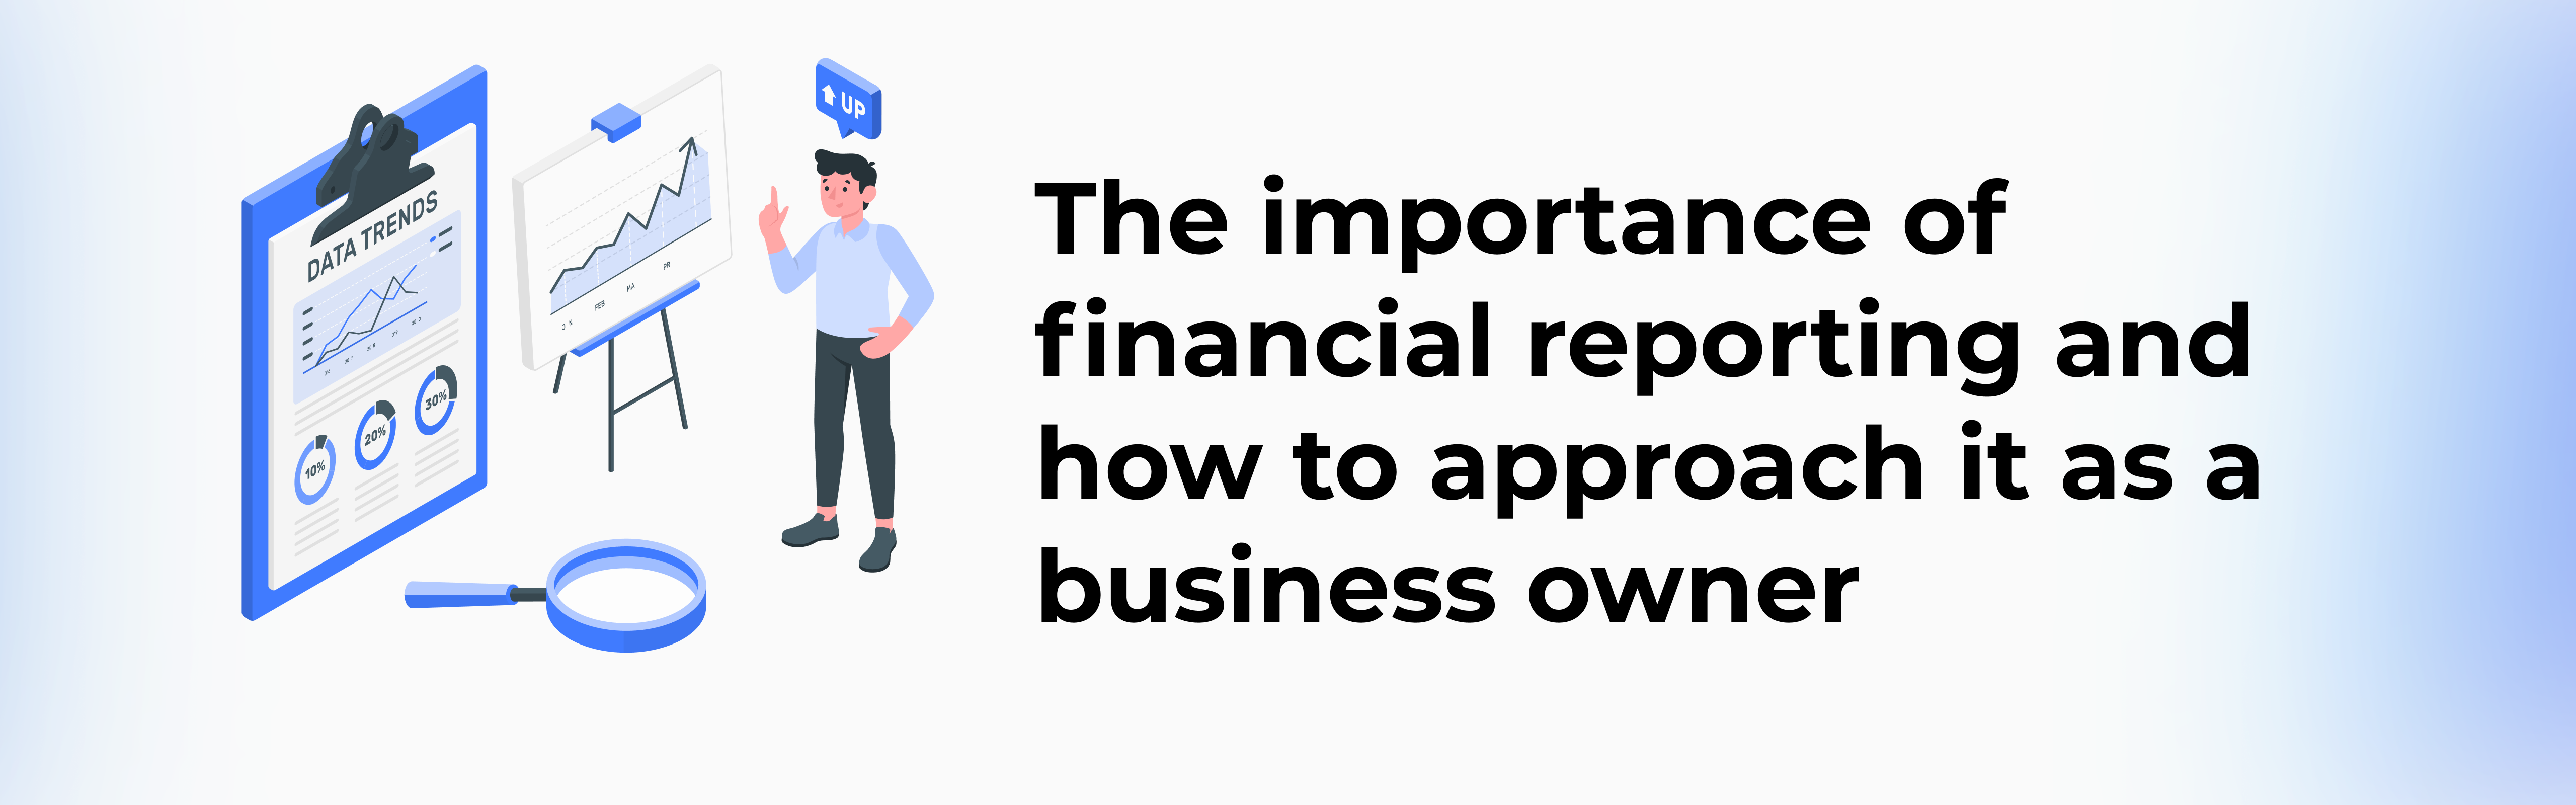 importance-of-financial-reporting-and-how-to-approach-as-business-owner